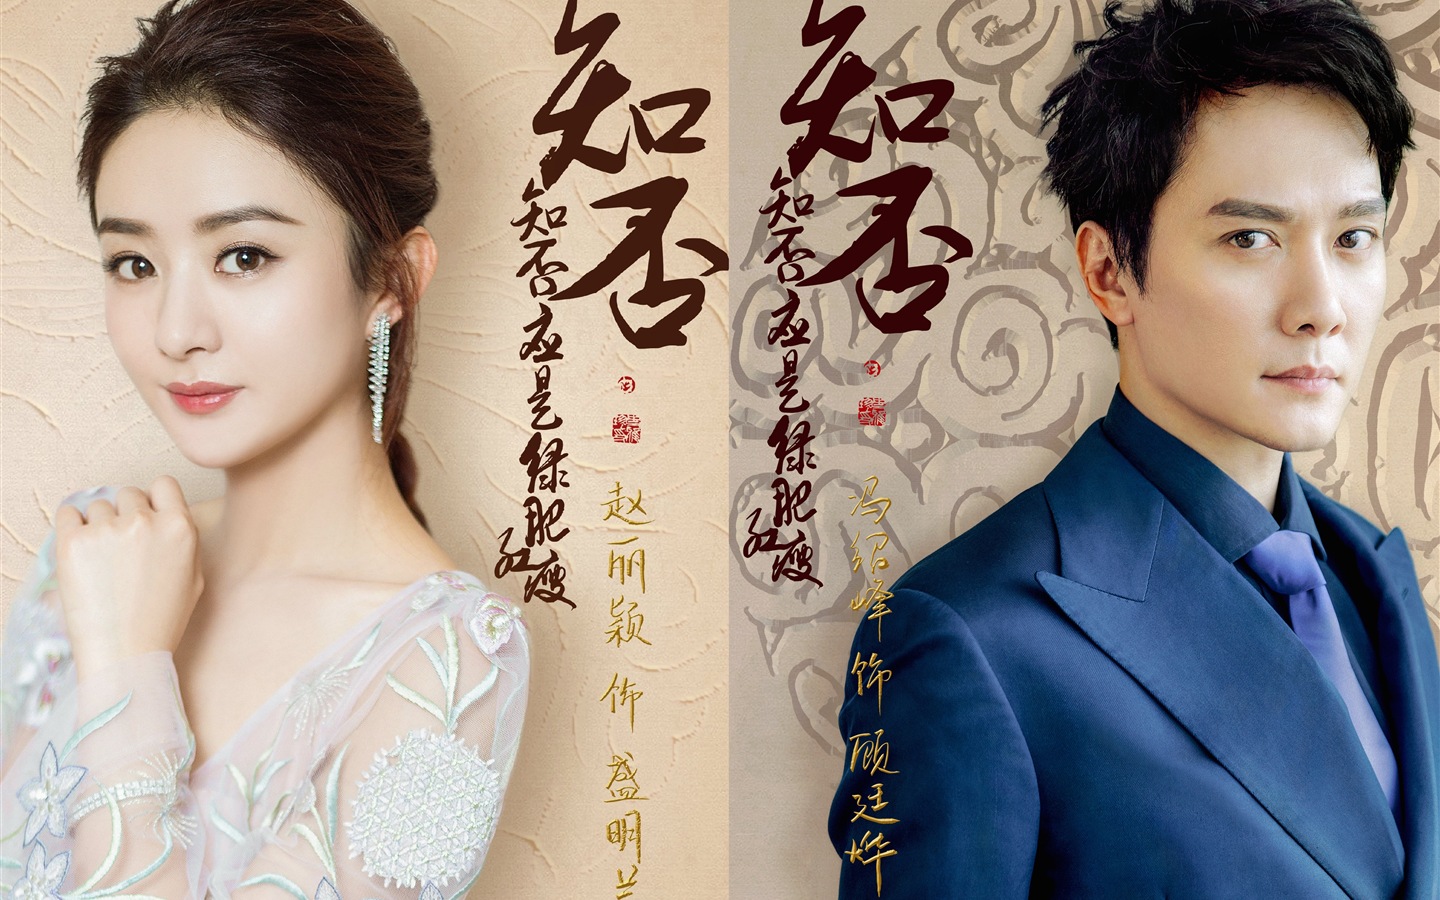 The Story Of MingLan, TV series HD wallpapers #46 - 1440x900